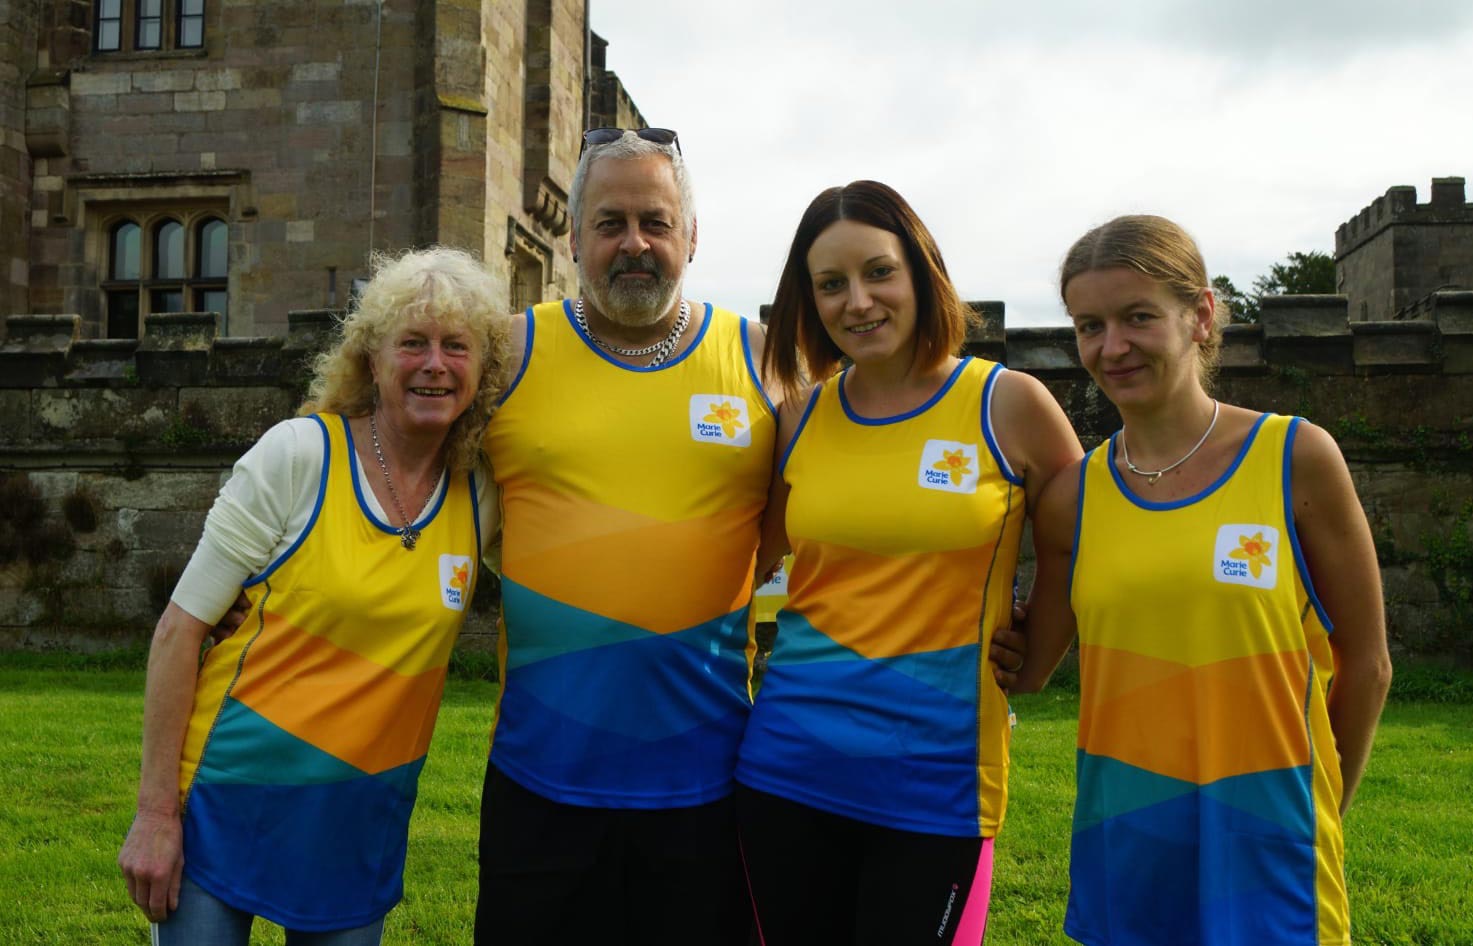 Tri-hards take on Yorshire Warrior for Marie Curie - Ripley Castle